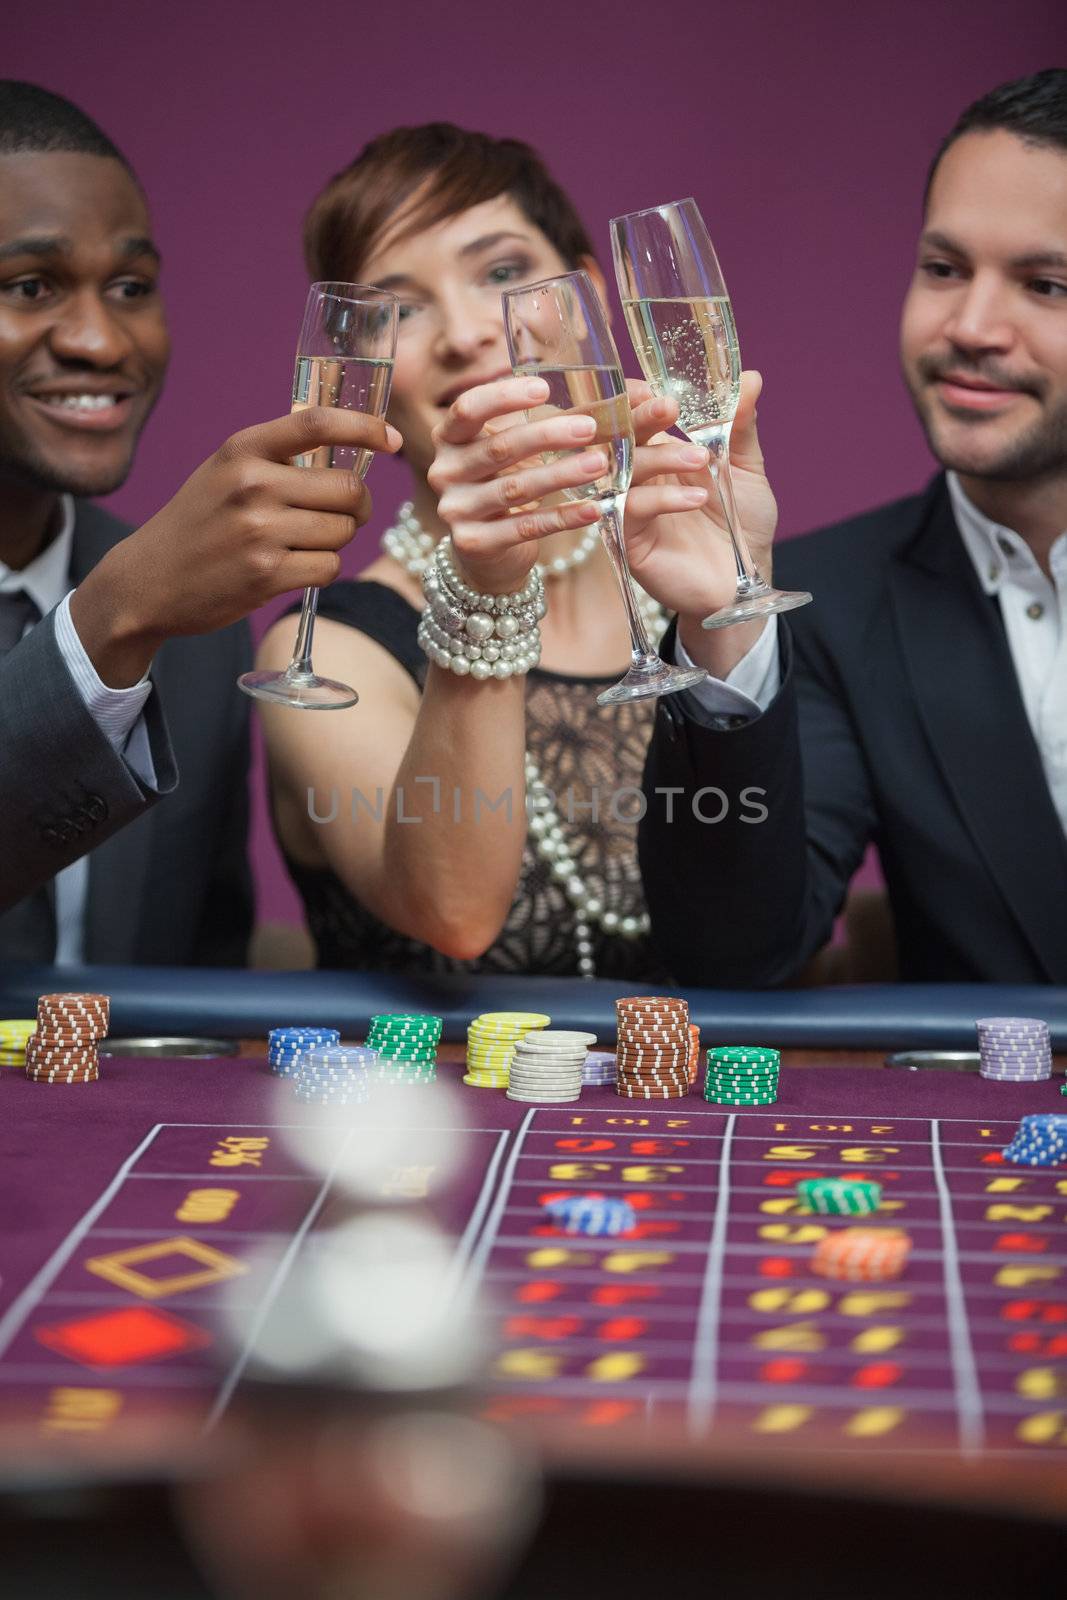 Three people toasting at roulette table in casino